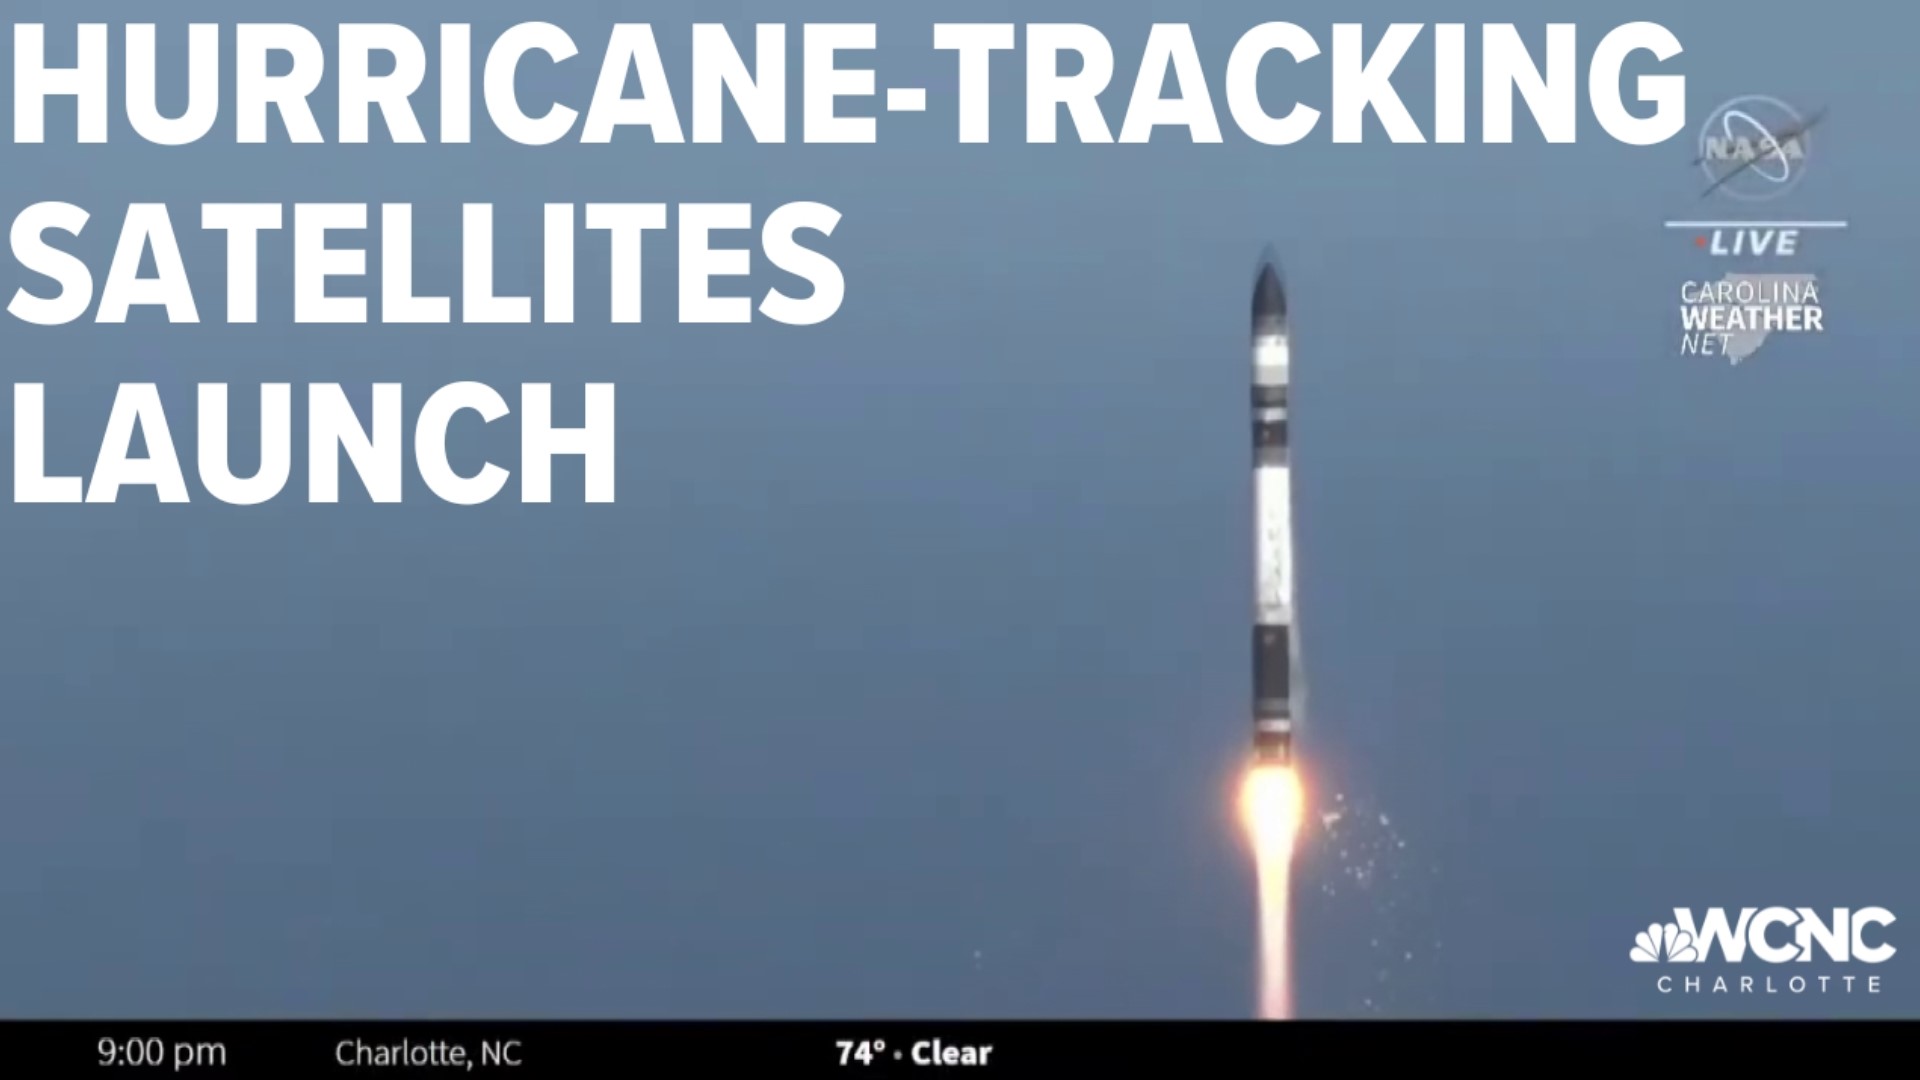 The first in a series of new miniature satellites intended to track hurricanes and other tropical weather launched into orbit Sunday night.